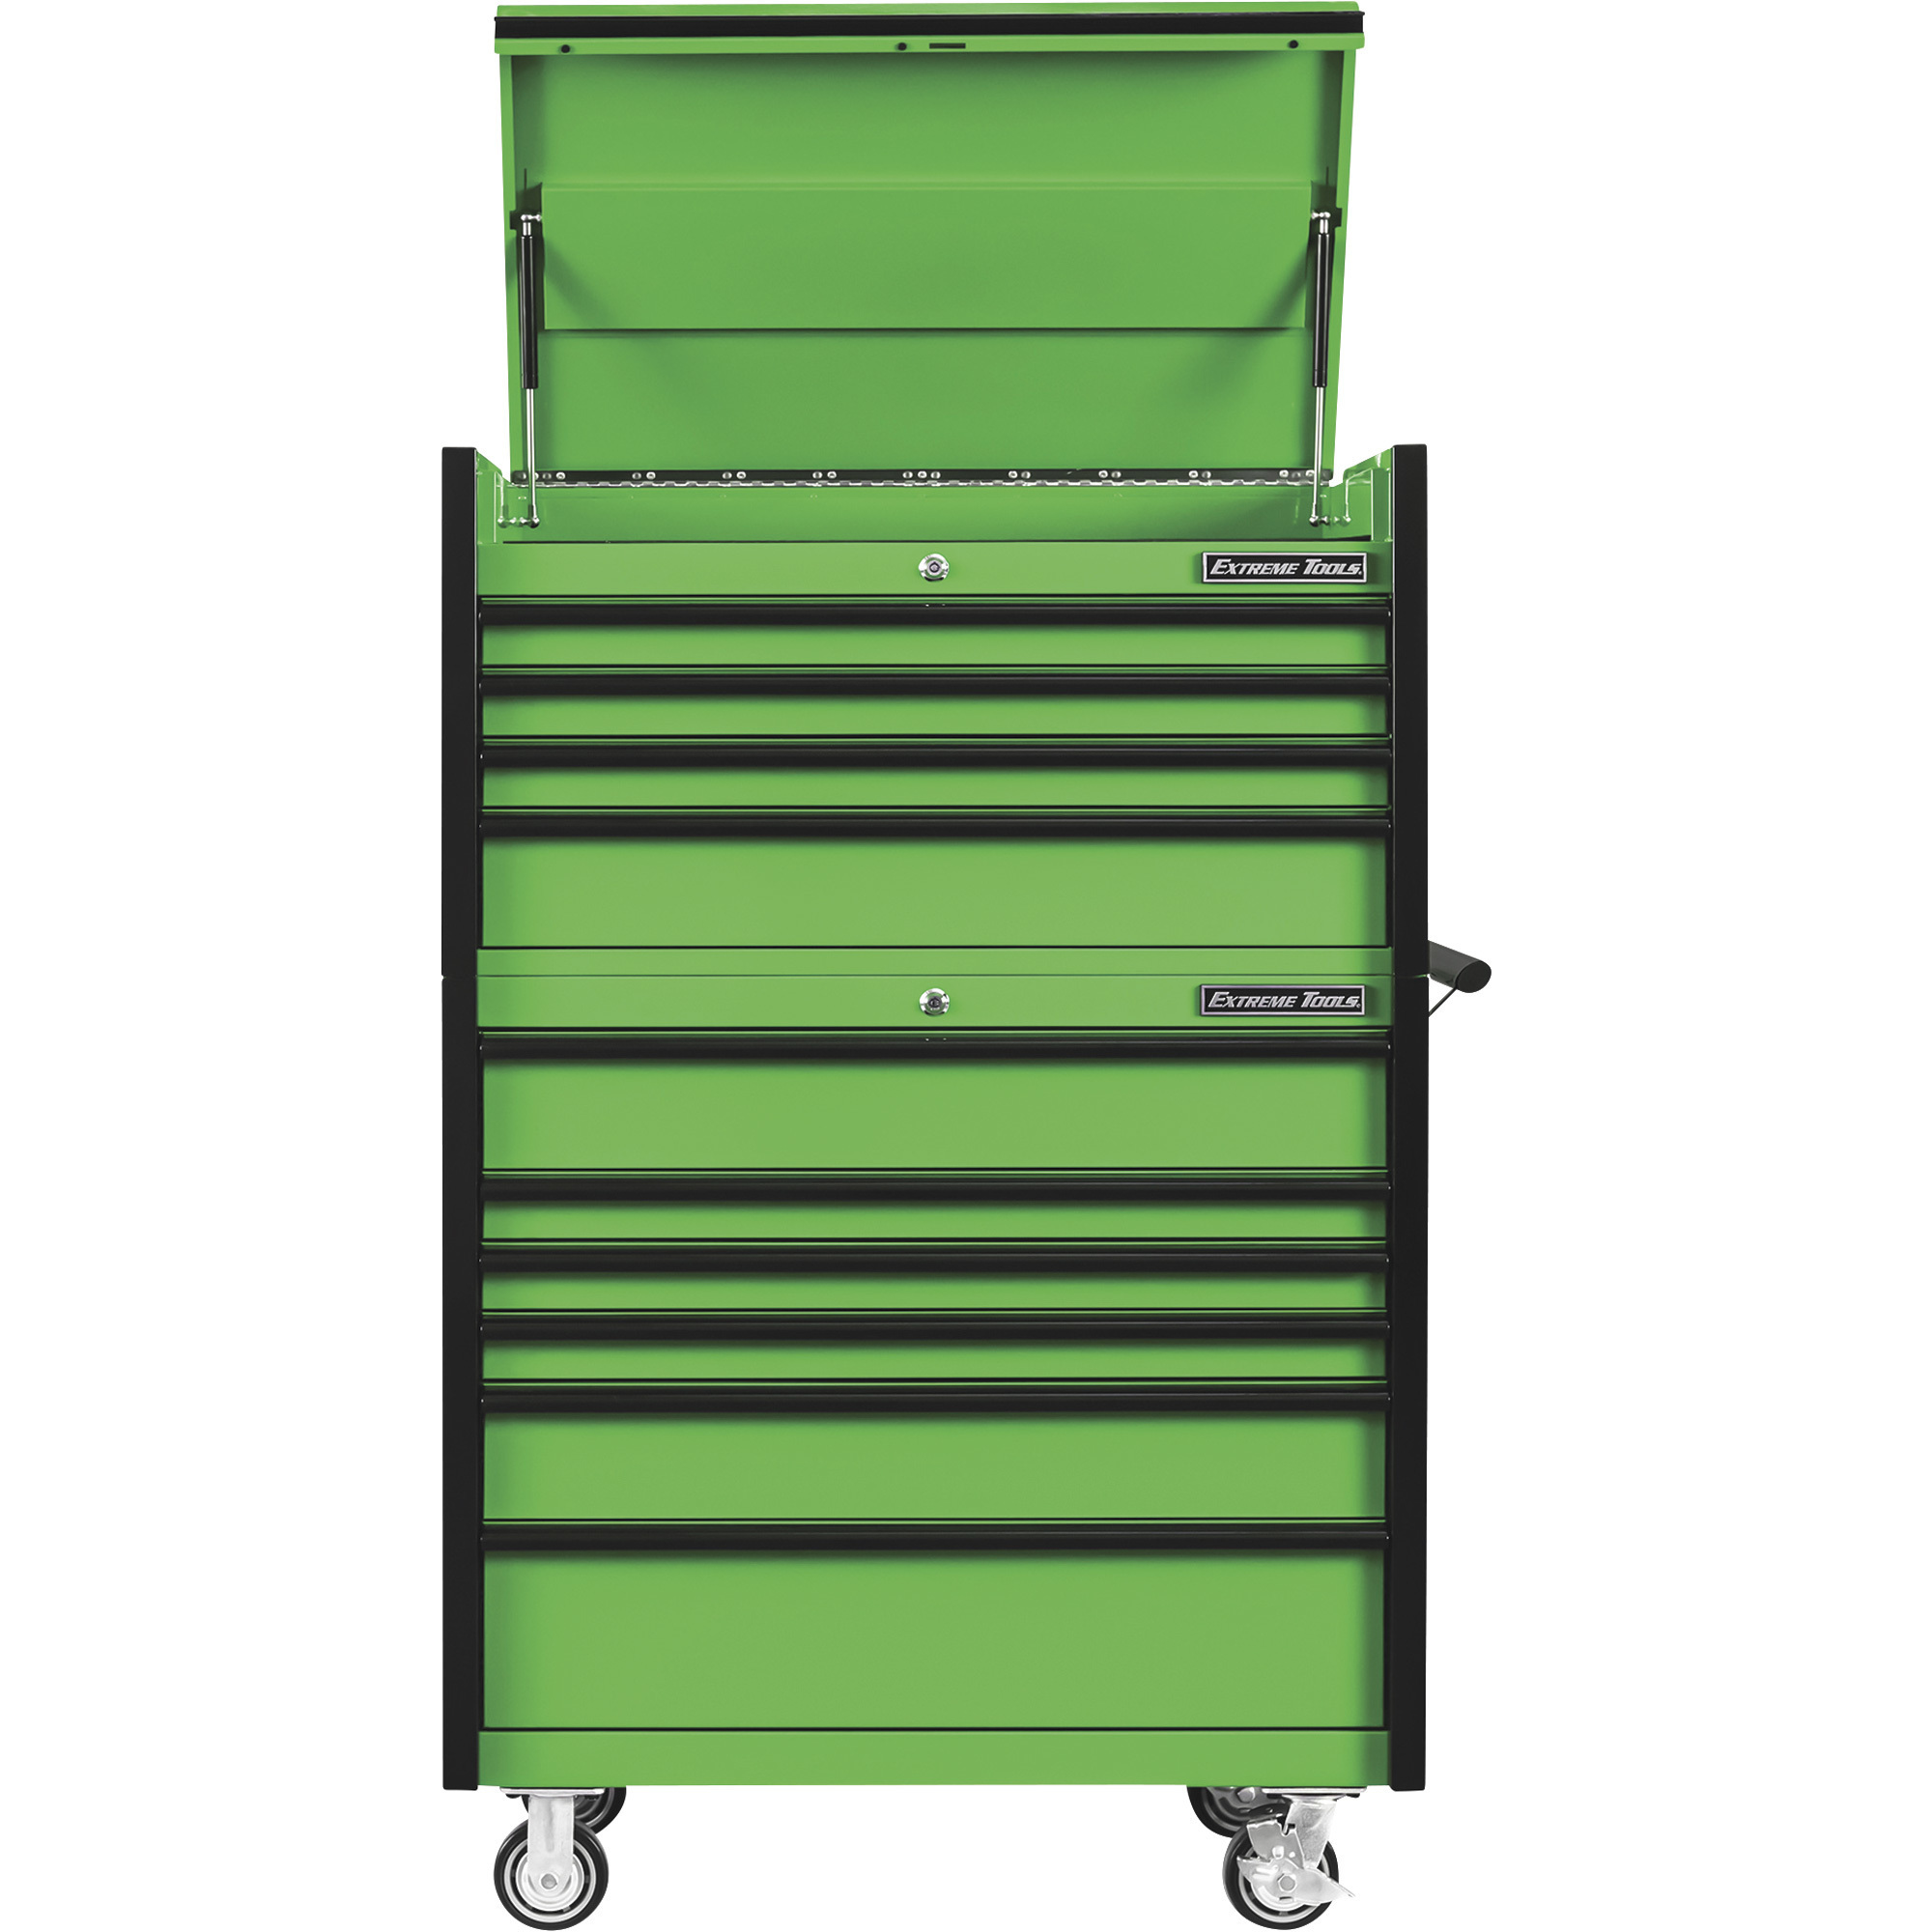 4-Drawer Top Chest/6-Drawer Roller Cabinet Combo — 41Inch W x 25Inch D x 64Inch H, Green/Black, Model - Extreme Tools DX4110CRGK